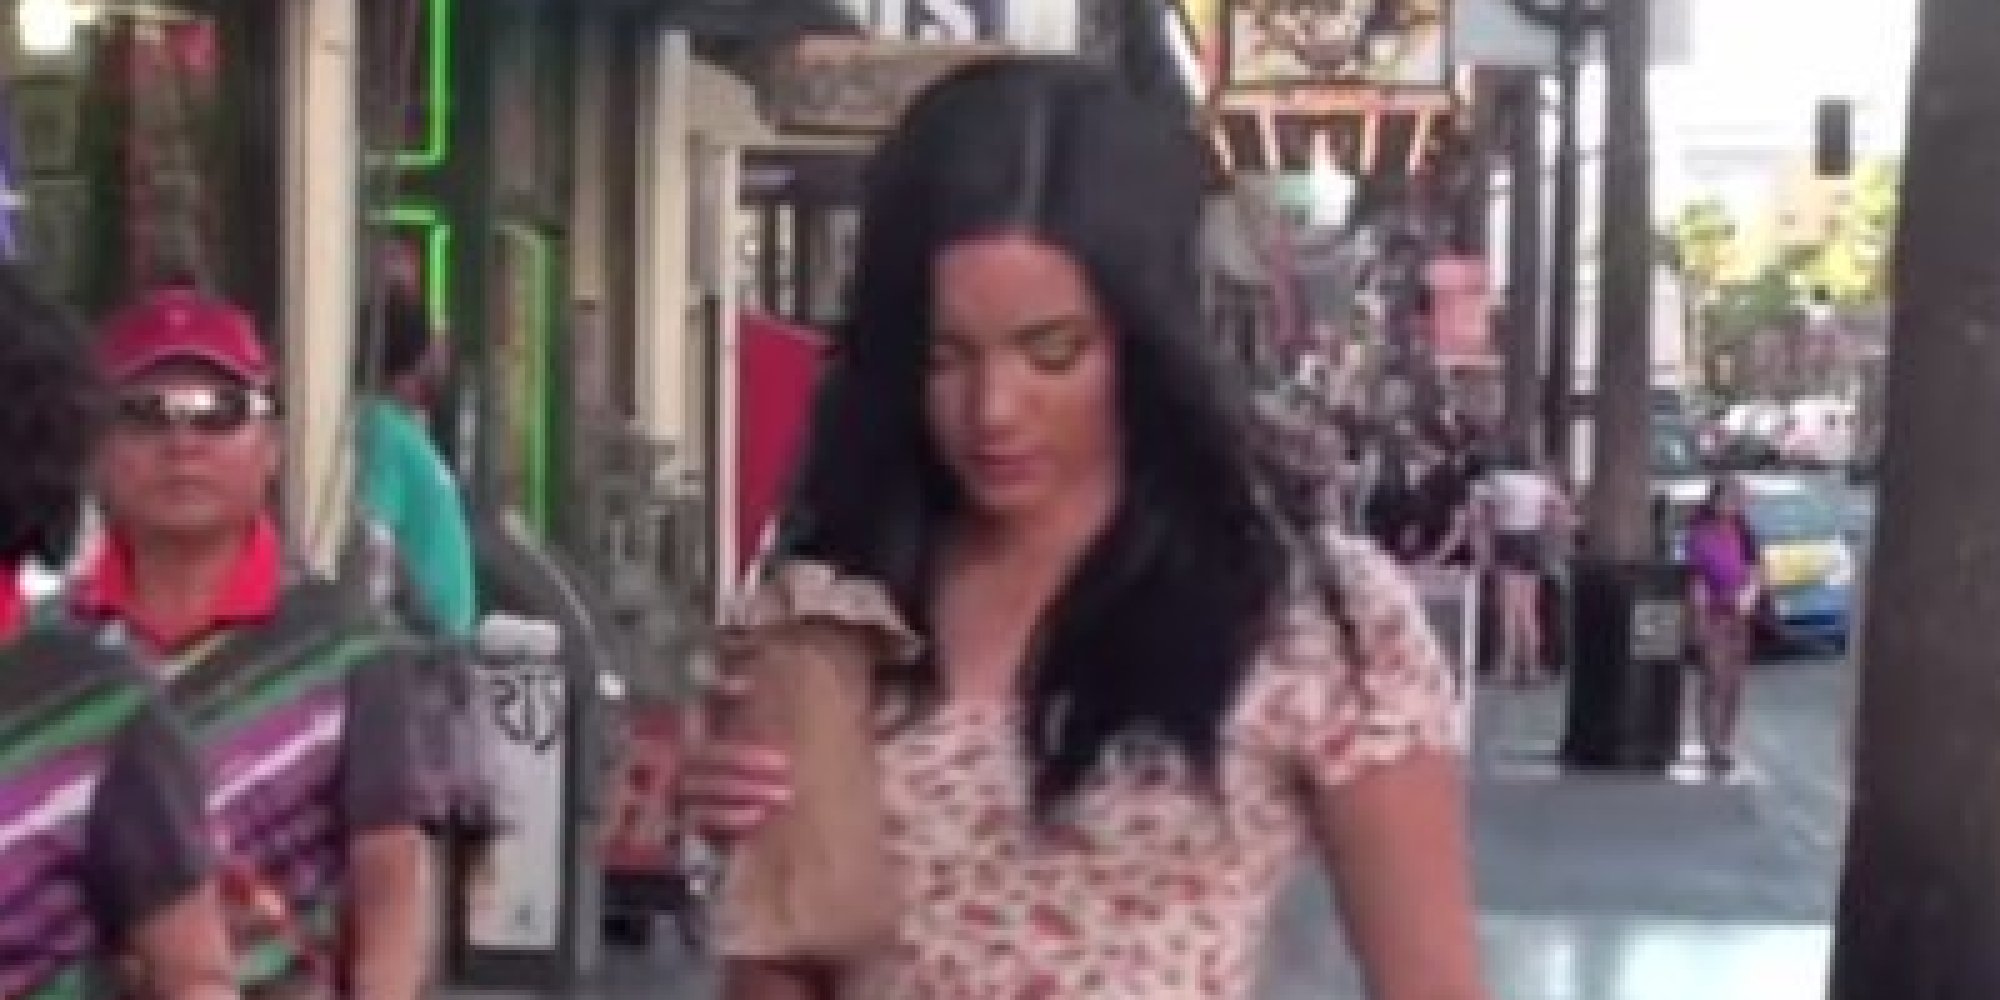 Drunk Girl In Public Viral Video Is A Hoax UPDATED HuffPost